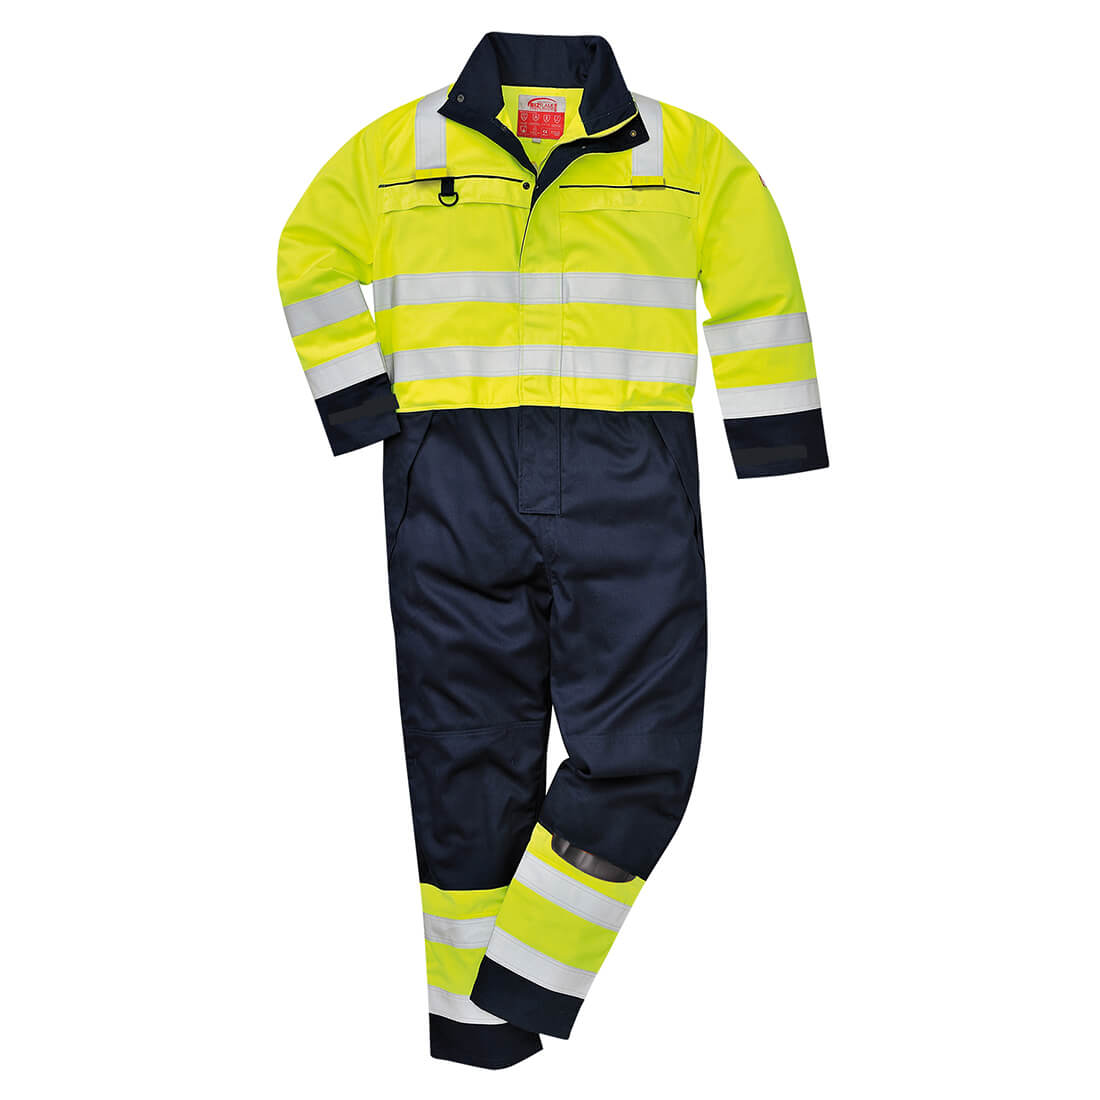 Image of Biz Flame Hi Vis Multi-Norm Flame Resistant Coverall Yellow / Navy 3XL